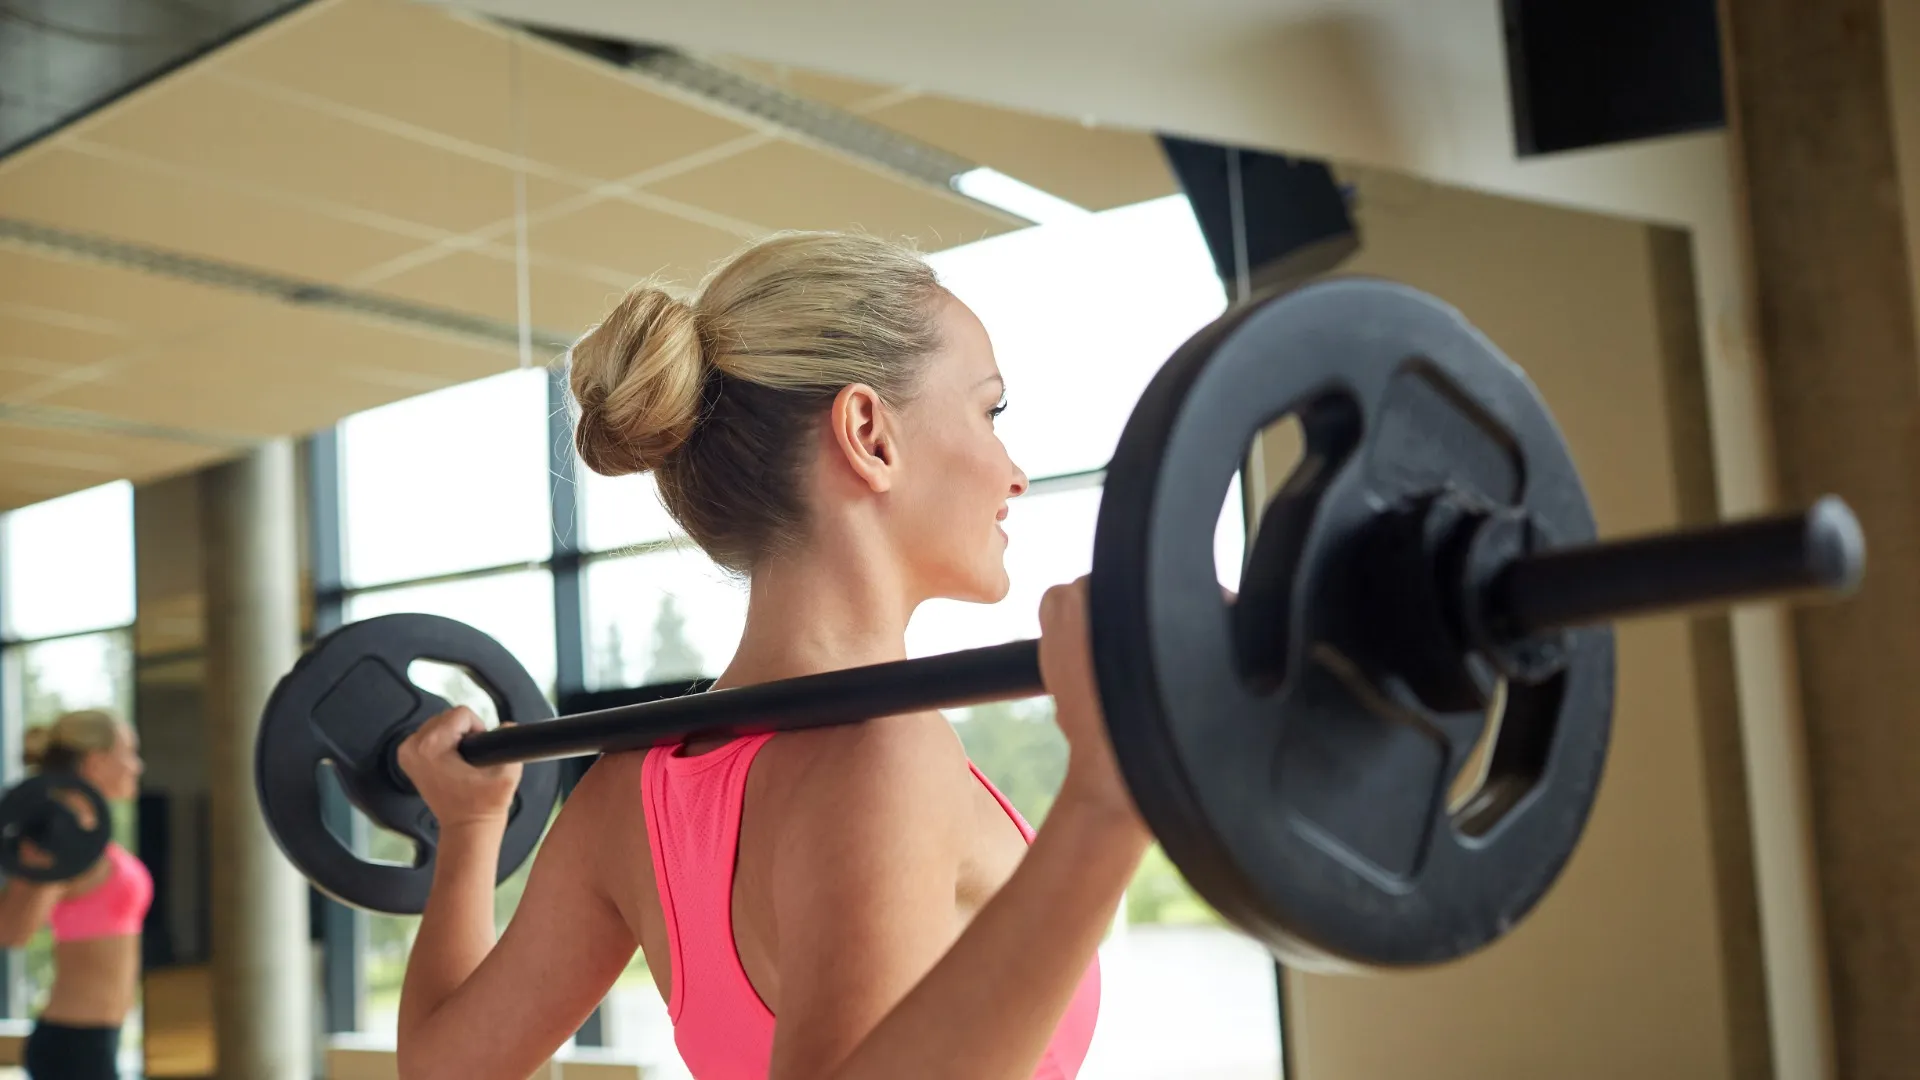 Ladies, Is Your Exercise Routine Depleting Your Hormones?